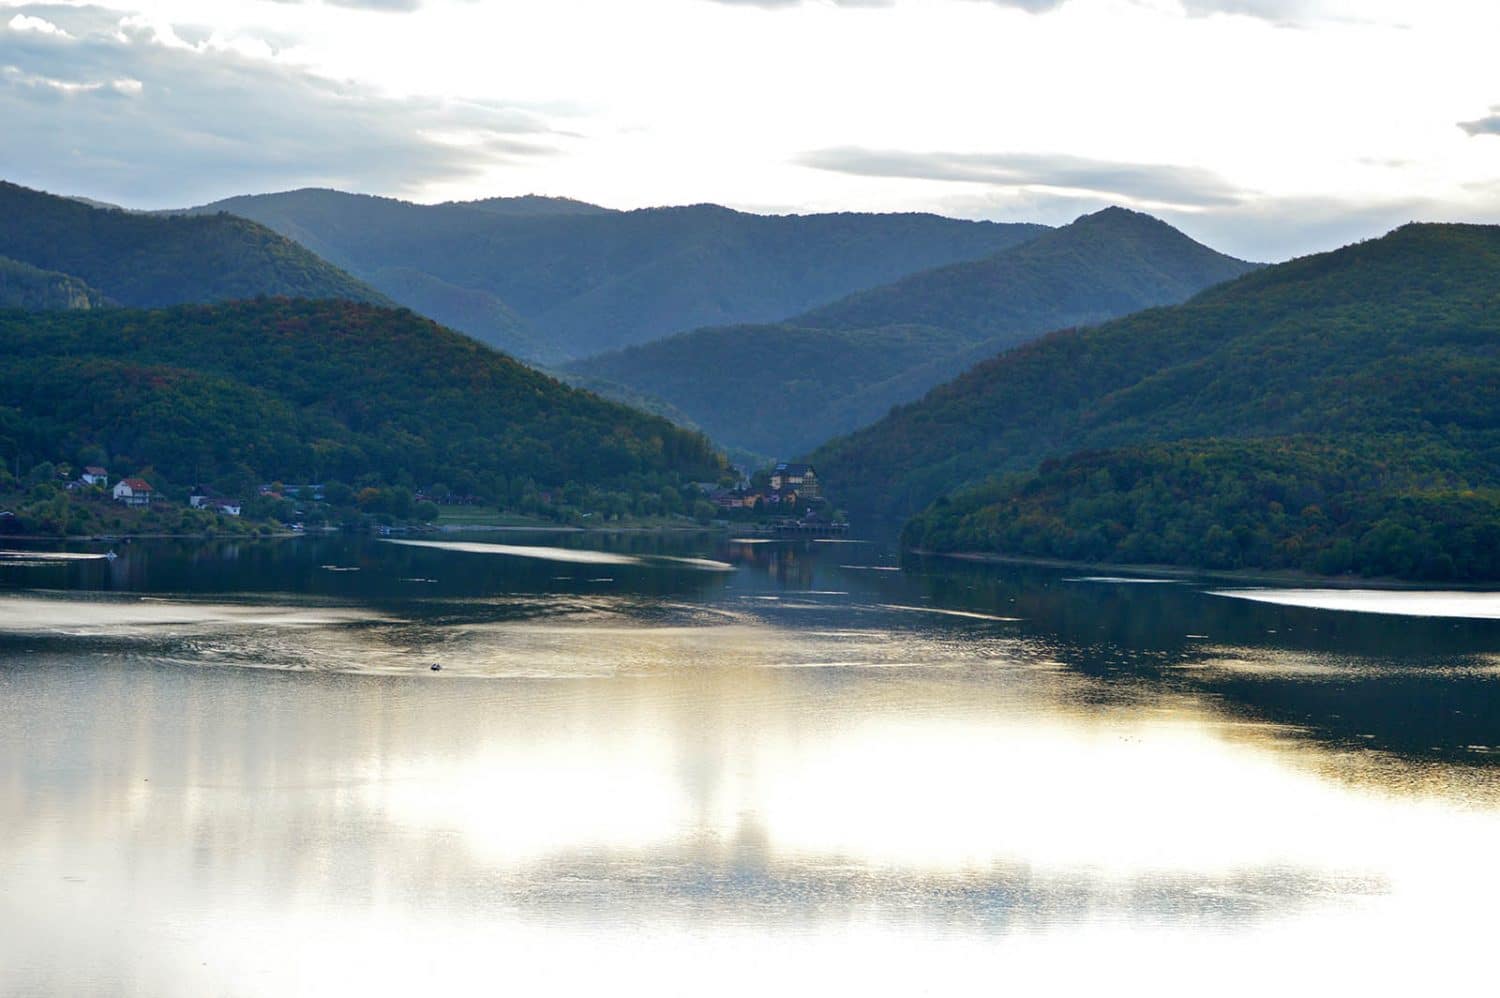 Cincis Lake between the mountains, one of the best places to visit in Hunedoara